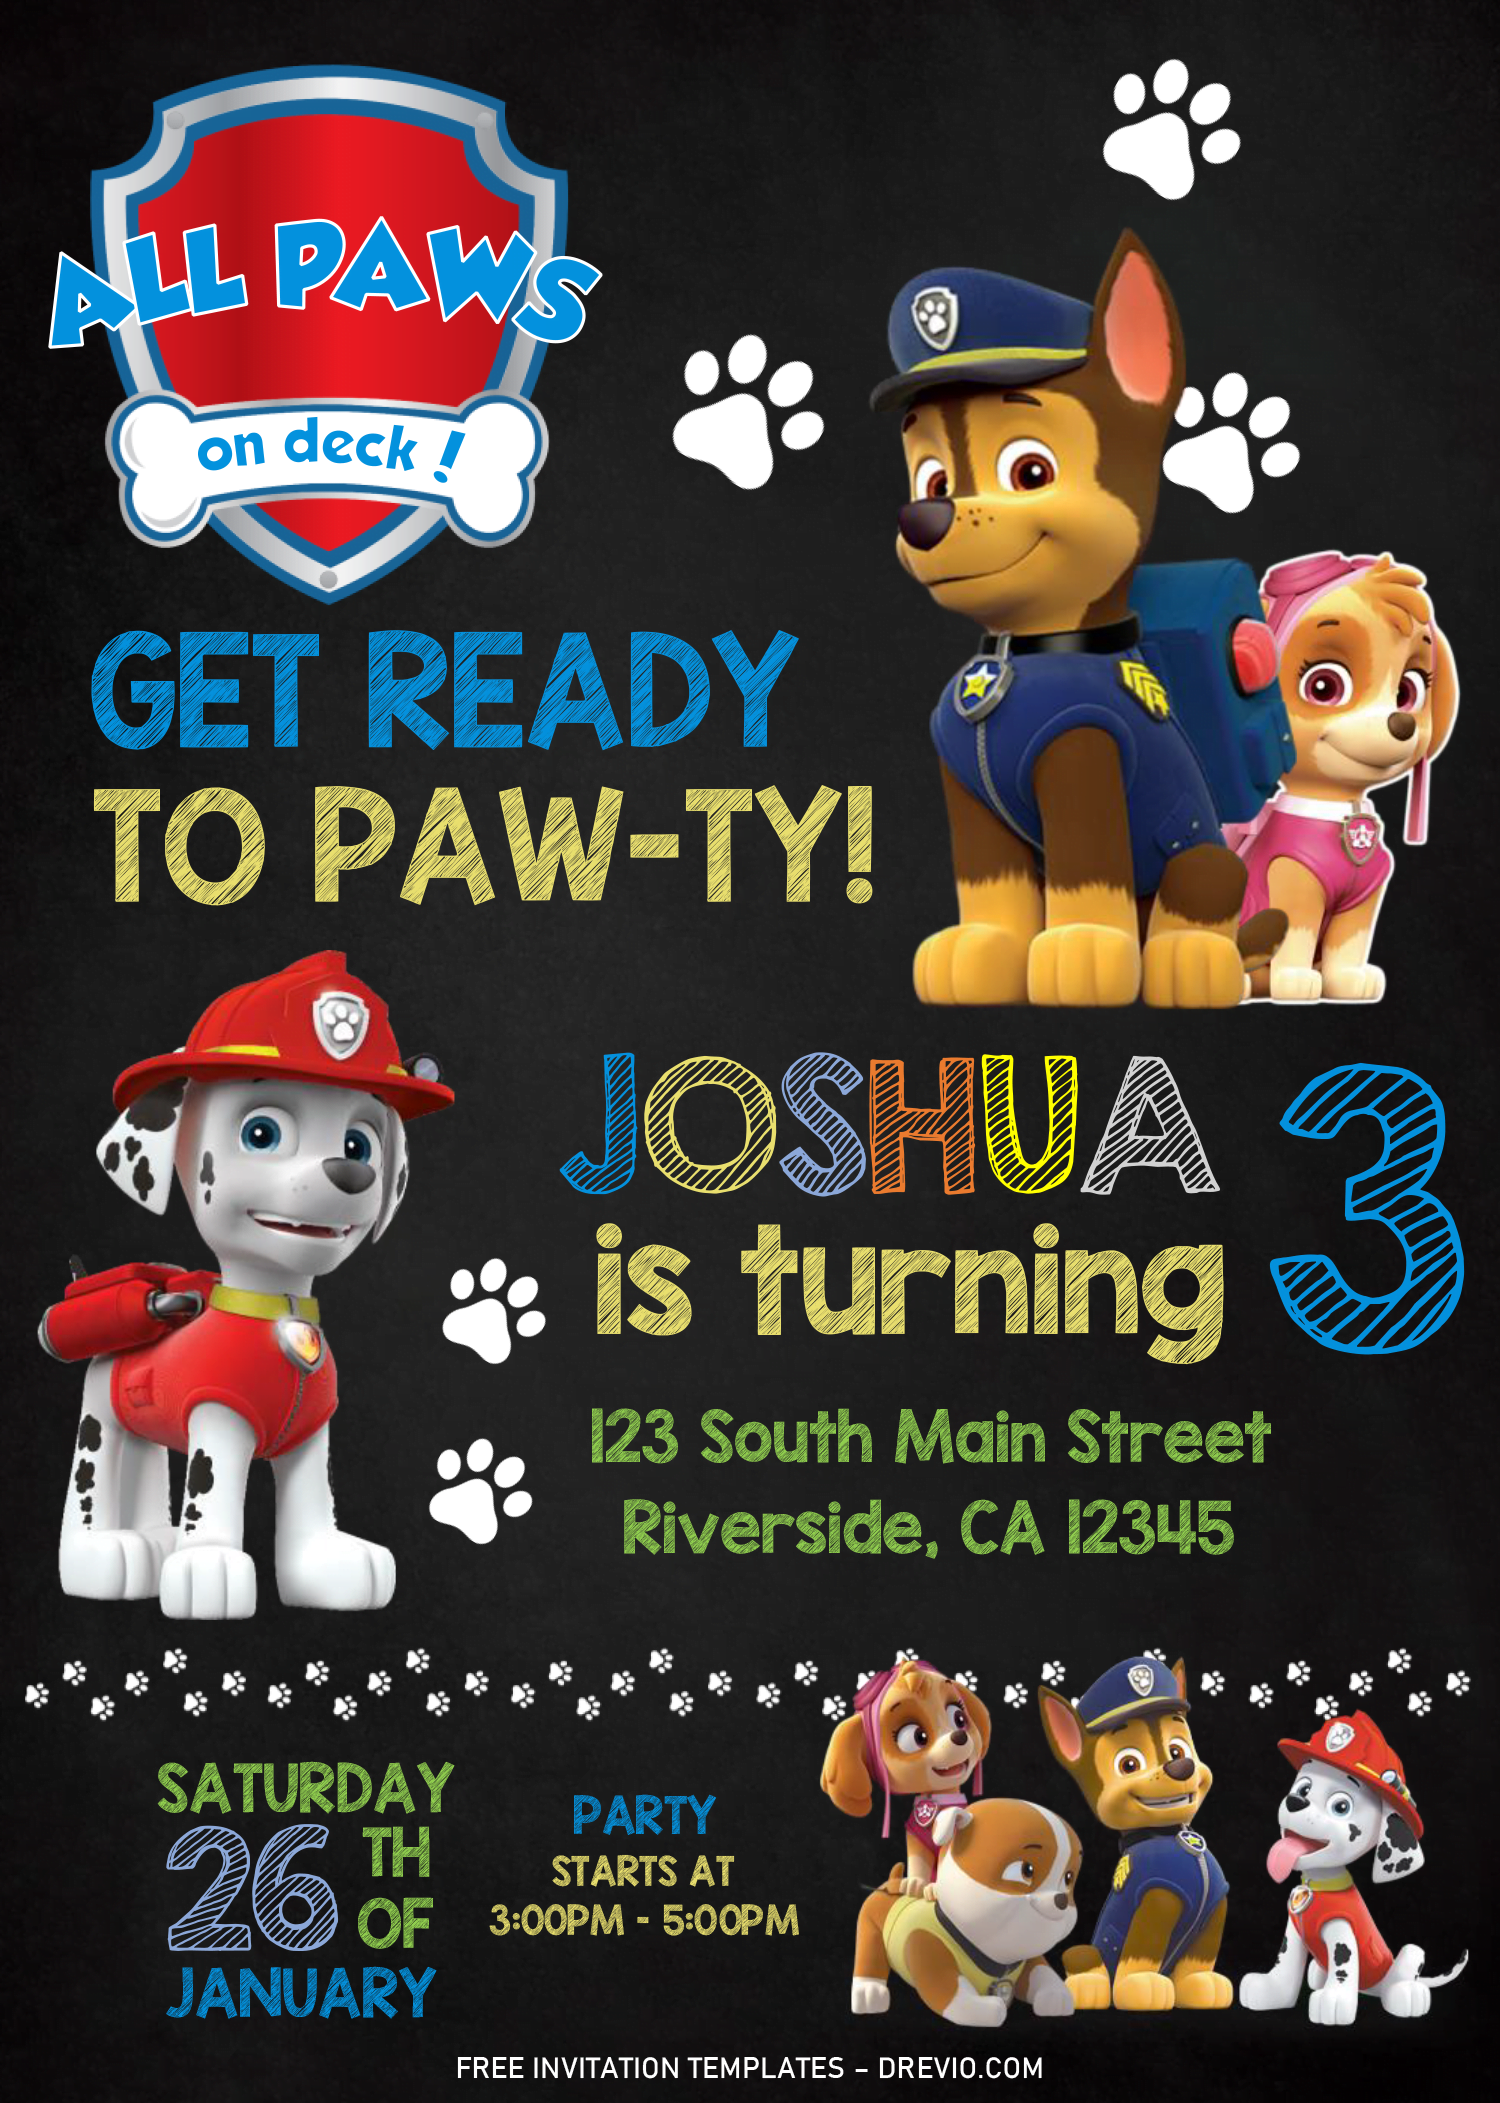 FREE Chalkboard PAW Patrol Invitation Templates Editable With MS Word Download Hundreds FREE